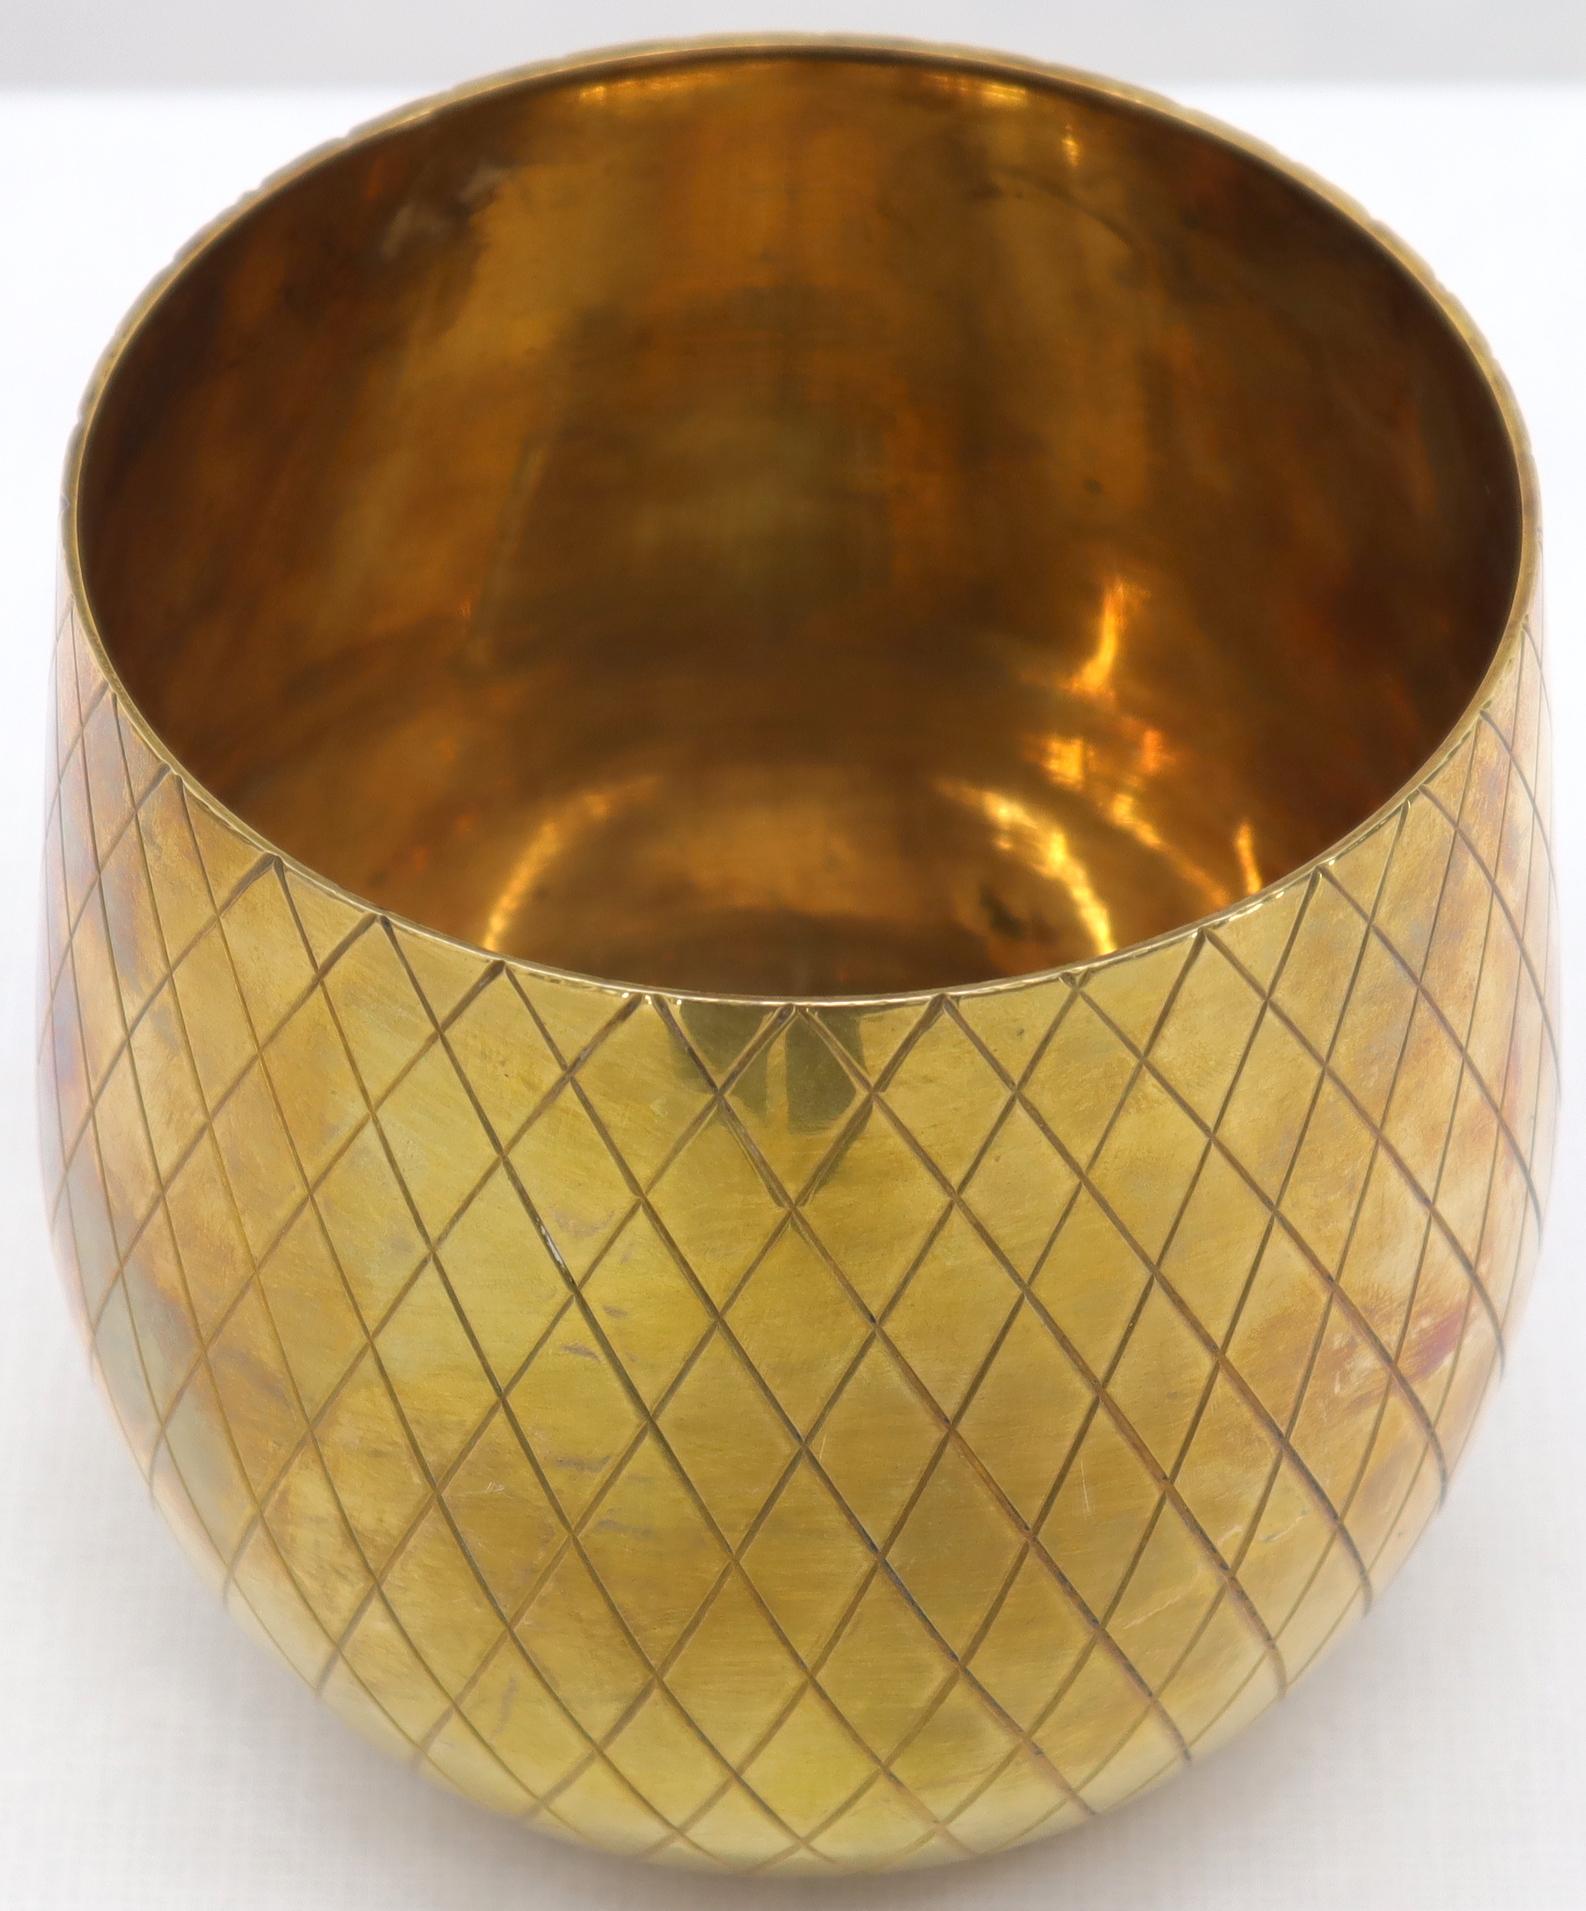 Gold Tone Solid Brass Pineapple Shape Jar with Lid In Excellent Condition For Sale In Rockaway, NJ